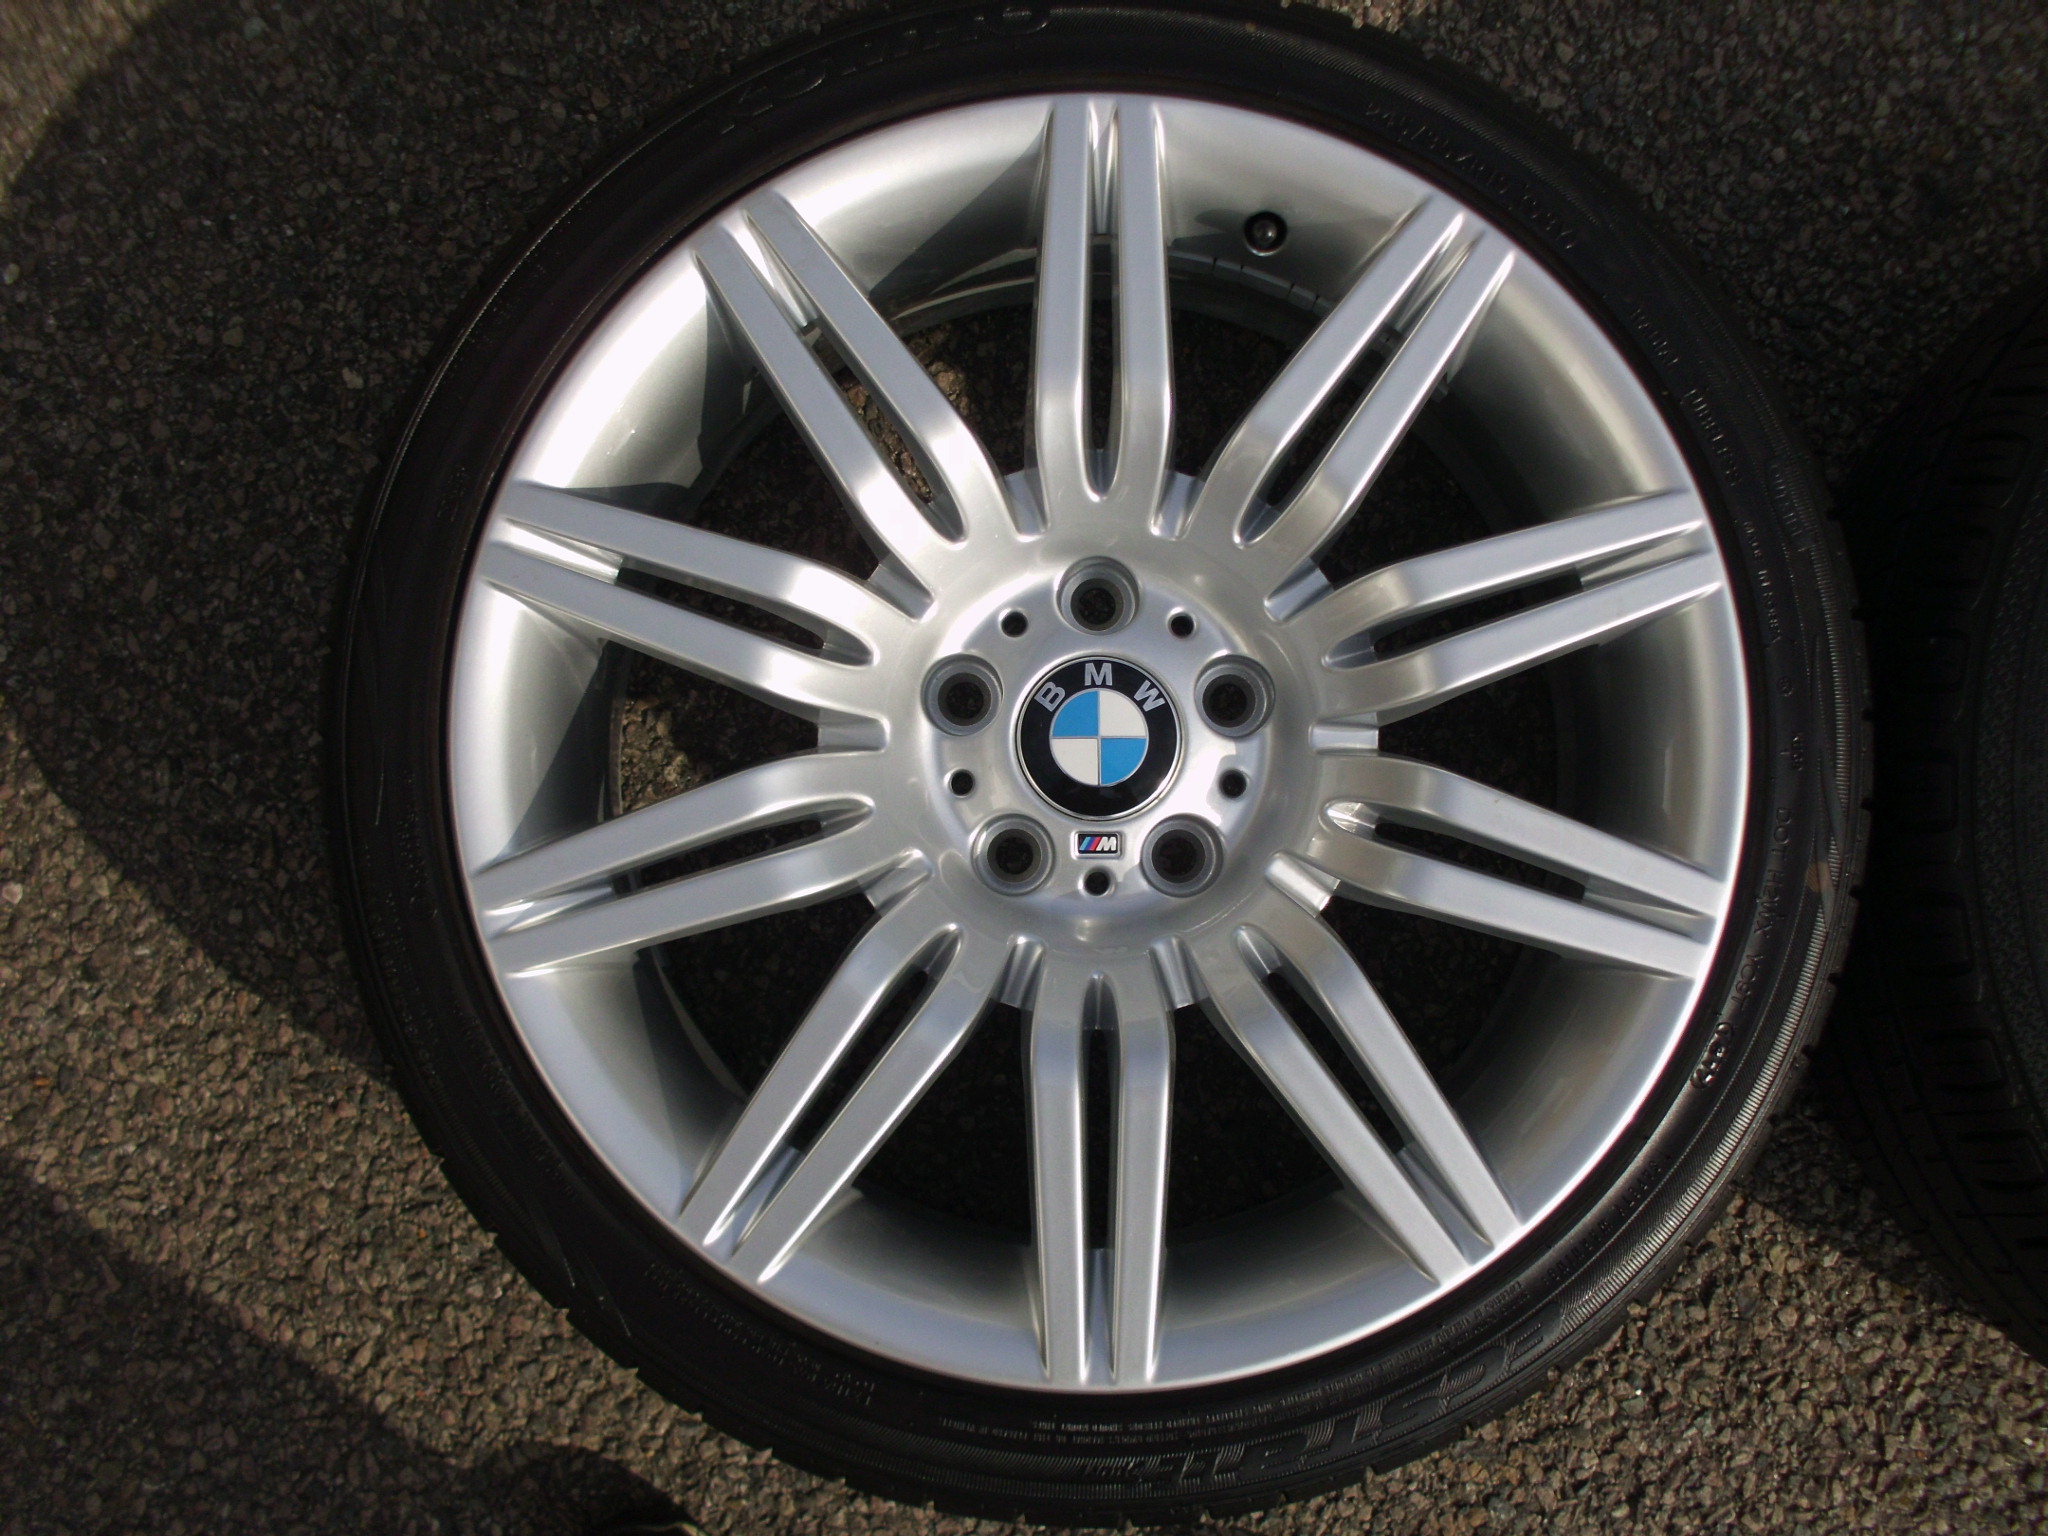 USED 19" GENUINE BMW STYLE 172 SPORT SPIDER ALLOY WHEELS, FULLY REFURBED INC GOOD TYRES